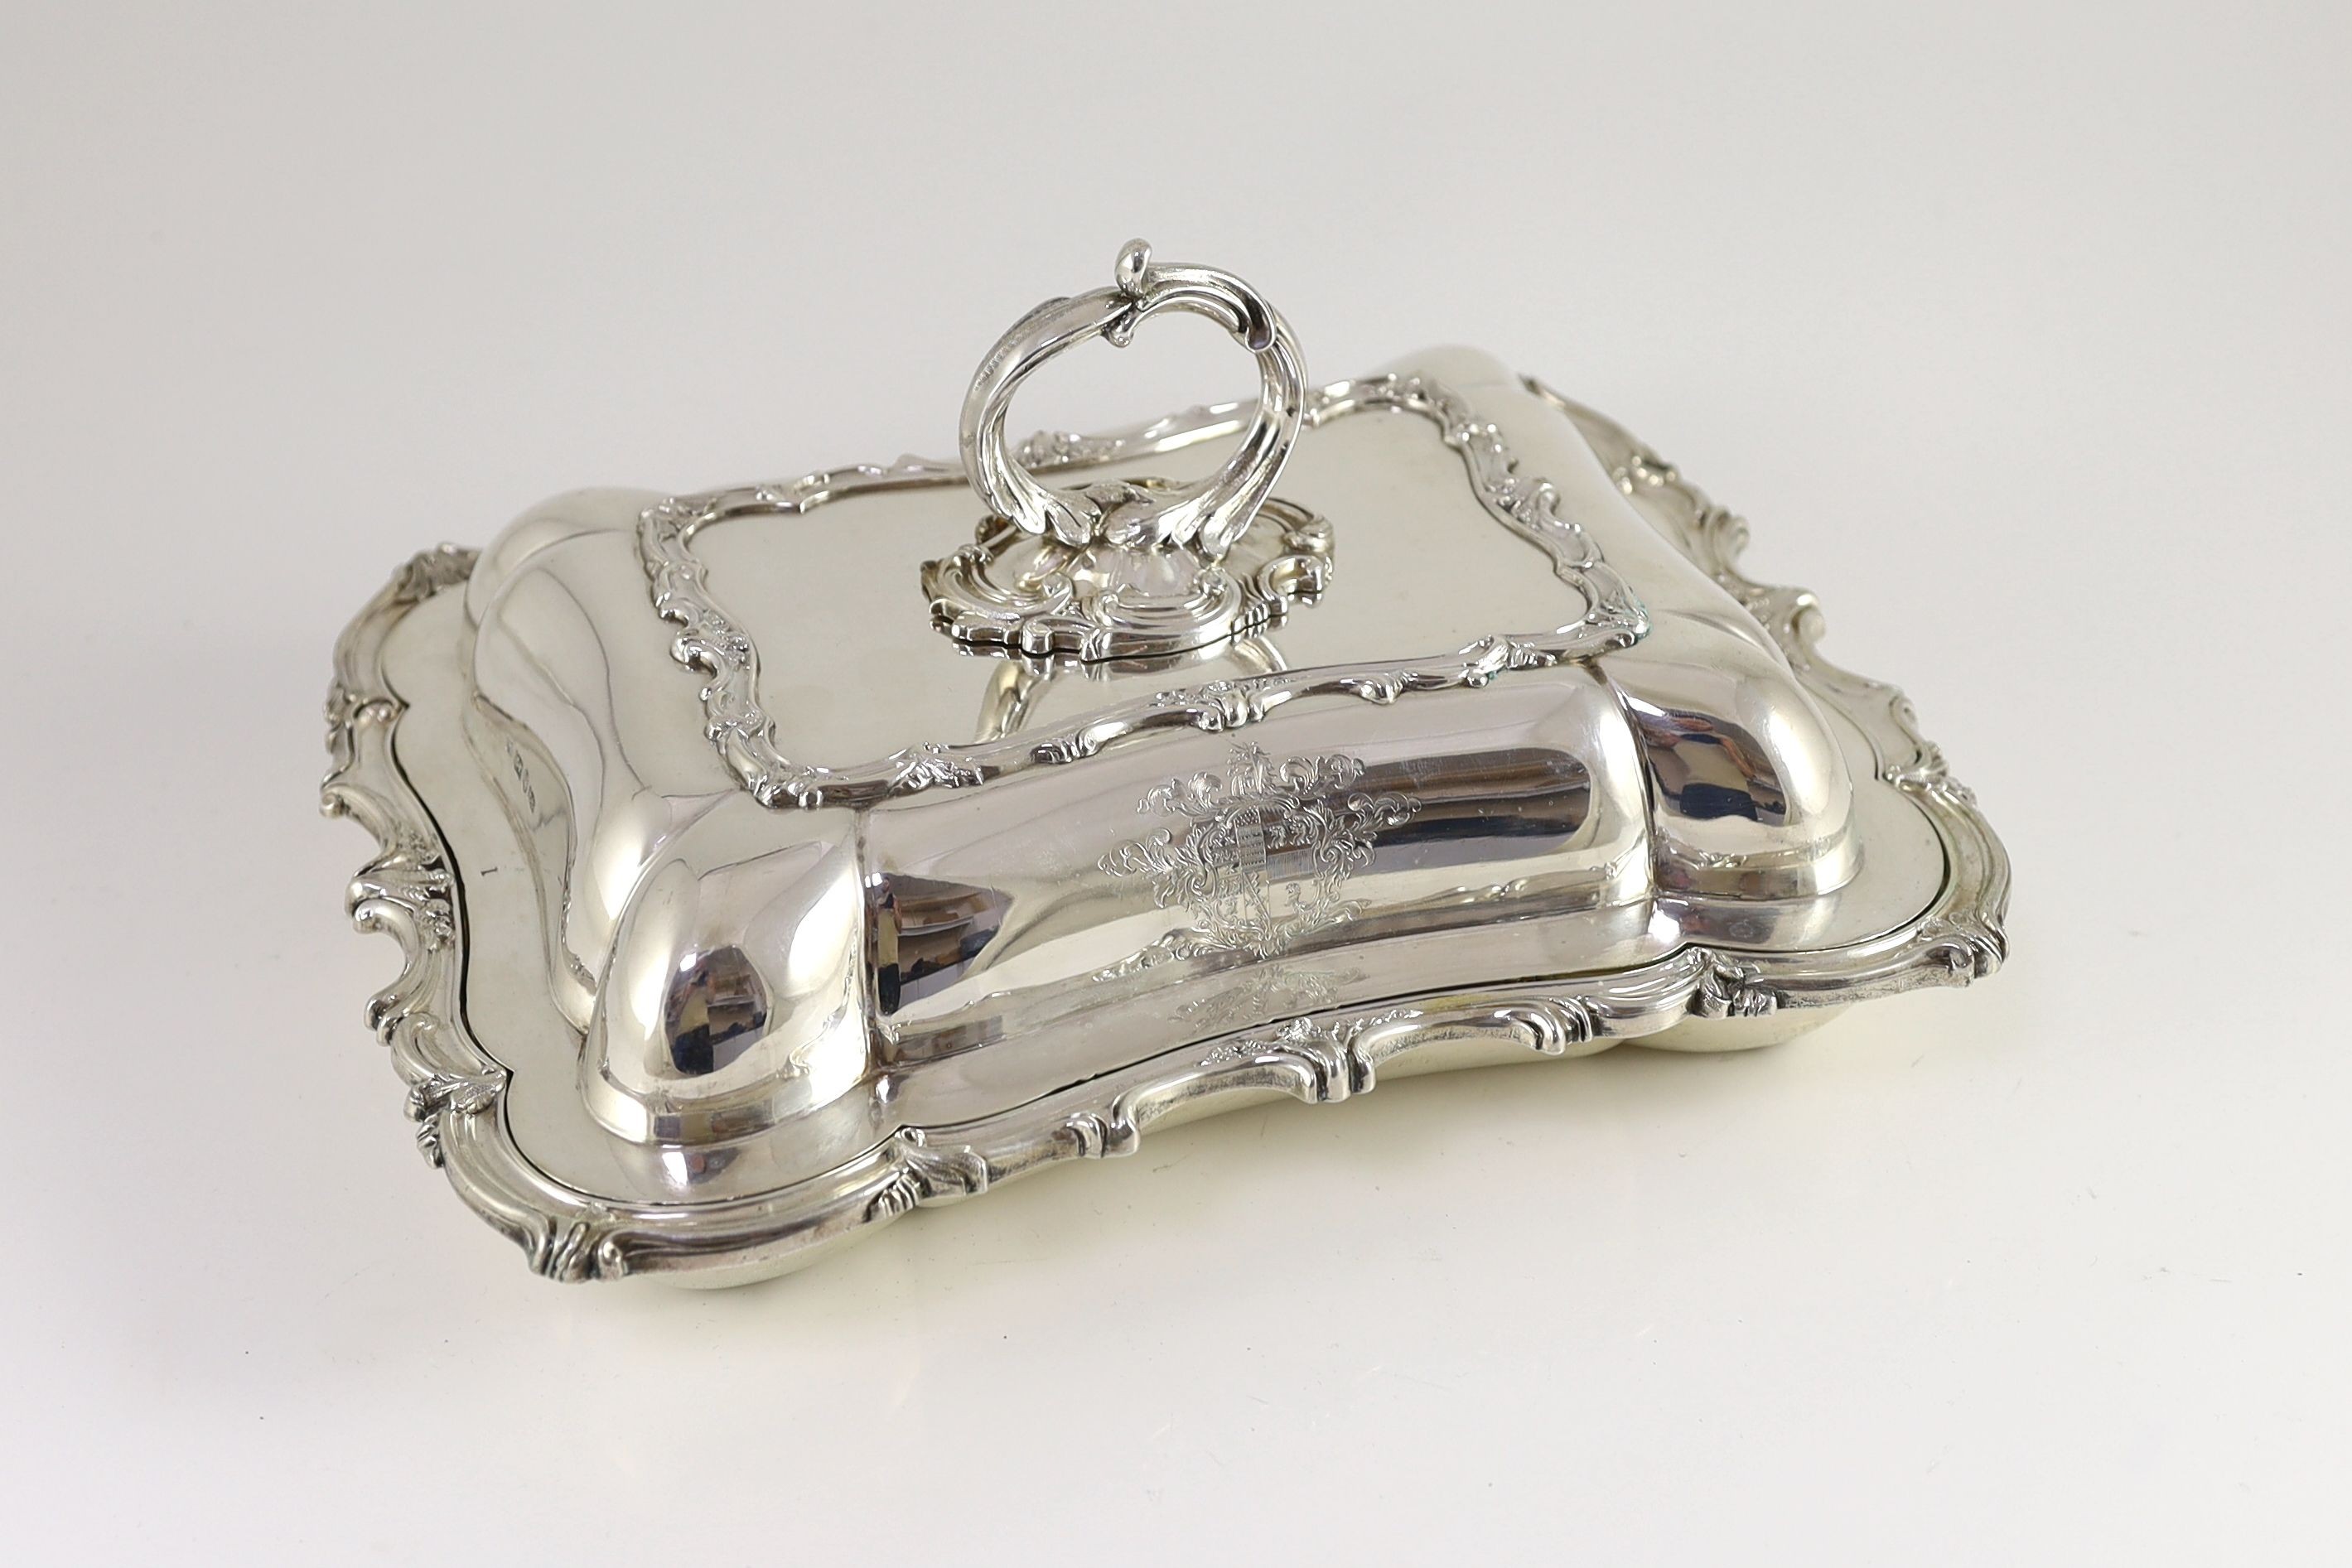 An early Victorian silver tureen and cover with handle, by Samuel Roberts & Co, with engraved presentation inscription and crest, relating to the Ulverston Union